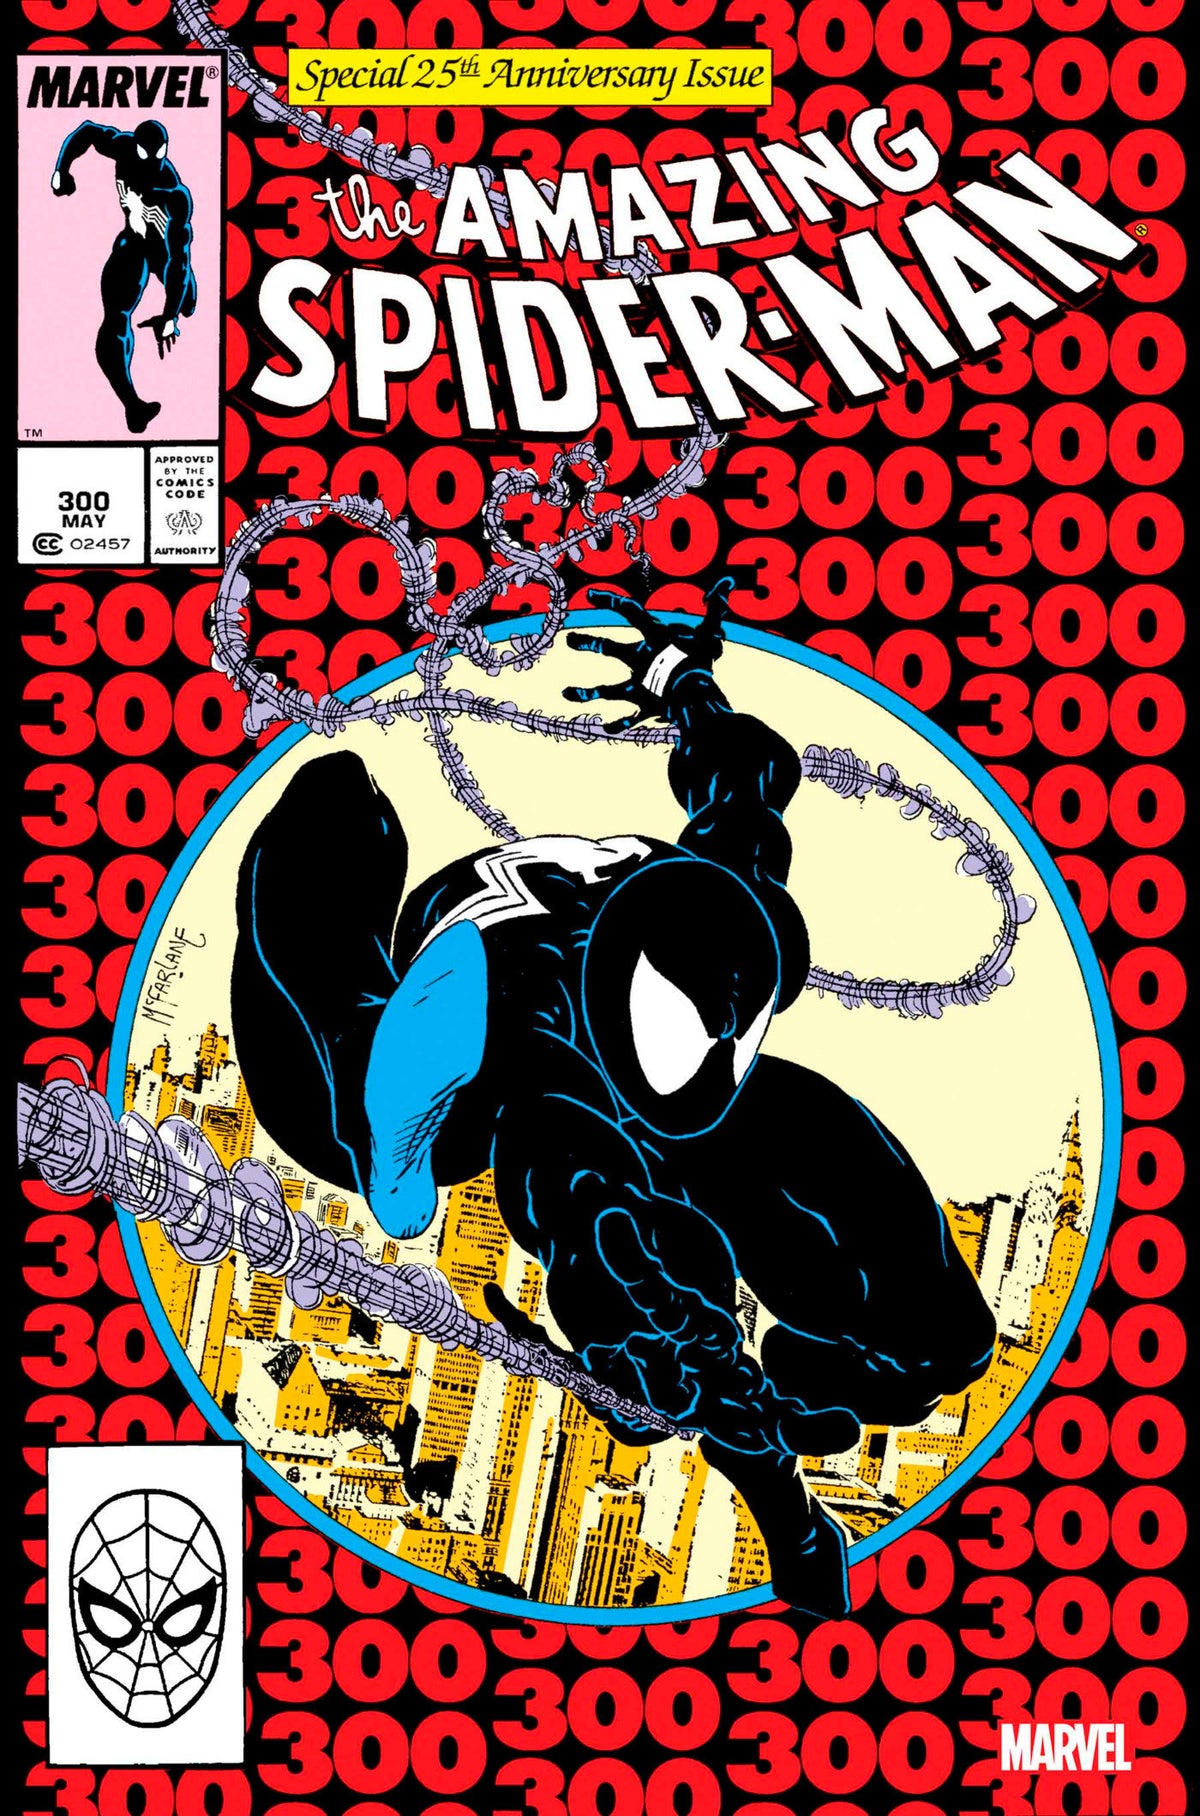 Stock photo of Amazing Spider-Man 300 Facsimile Edition Foil Variant comic sold by Stronghold Collectibles